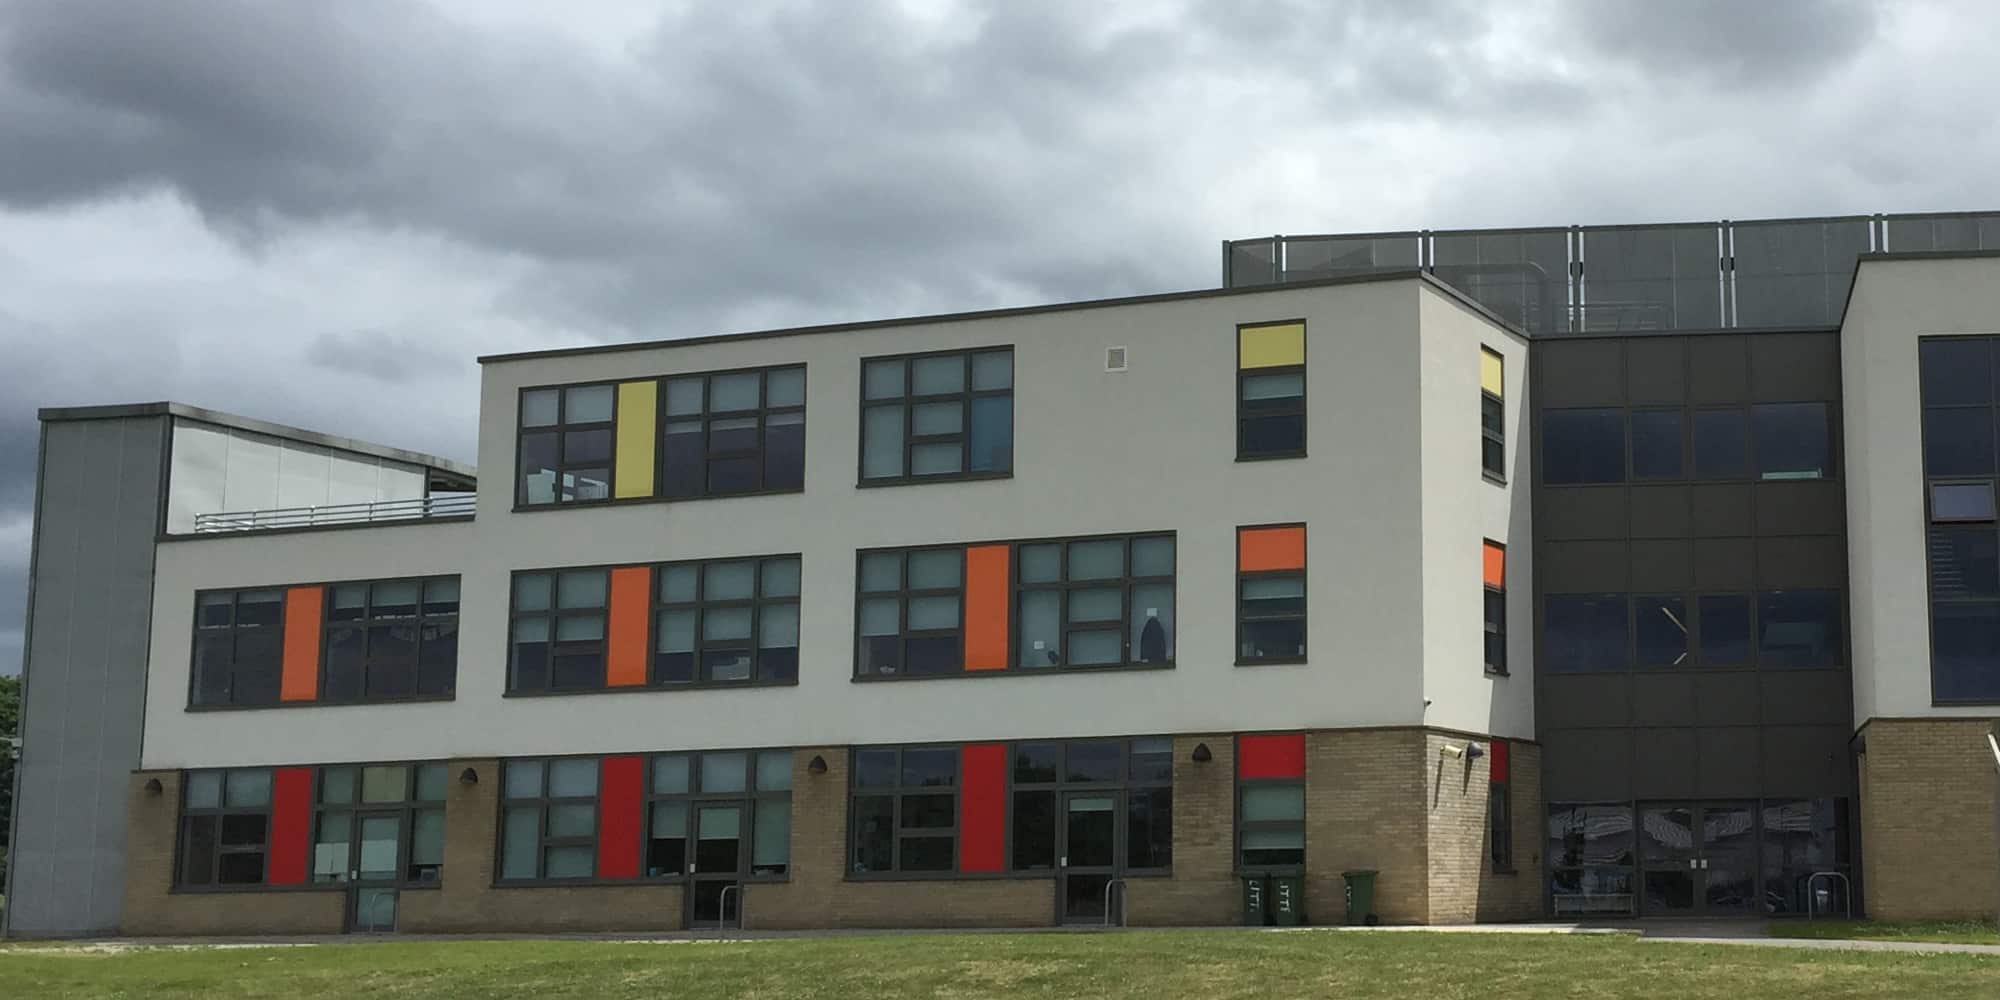 Syntha Pulvin Echelon powder coatings showing school with many coloured windows